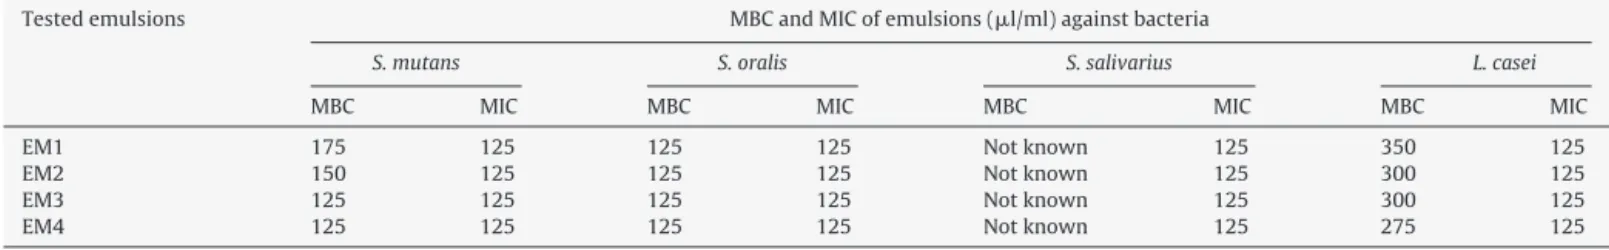 Table 1 shows the different concentrations of emulsions that showed bactericidal activity against S